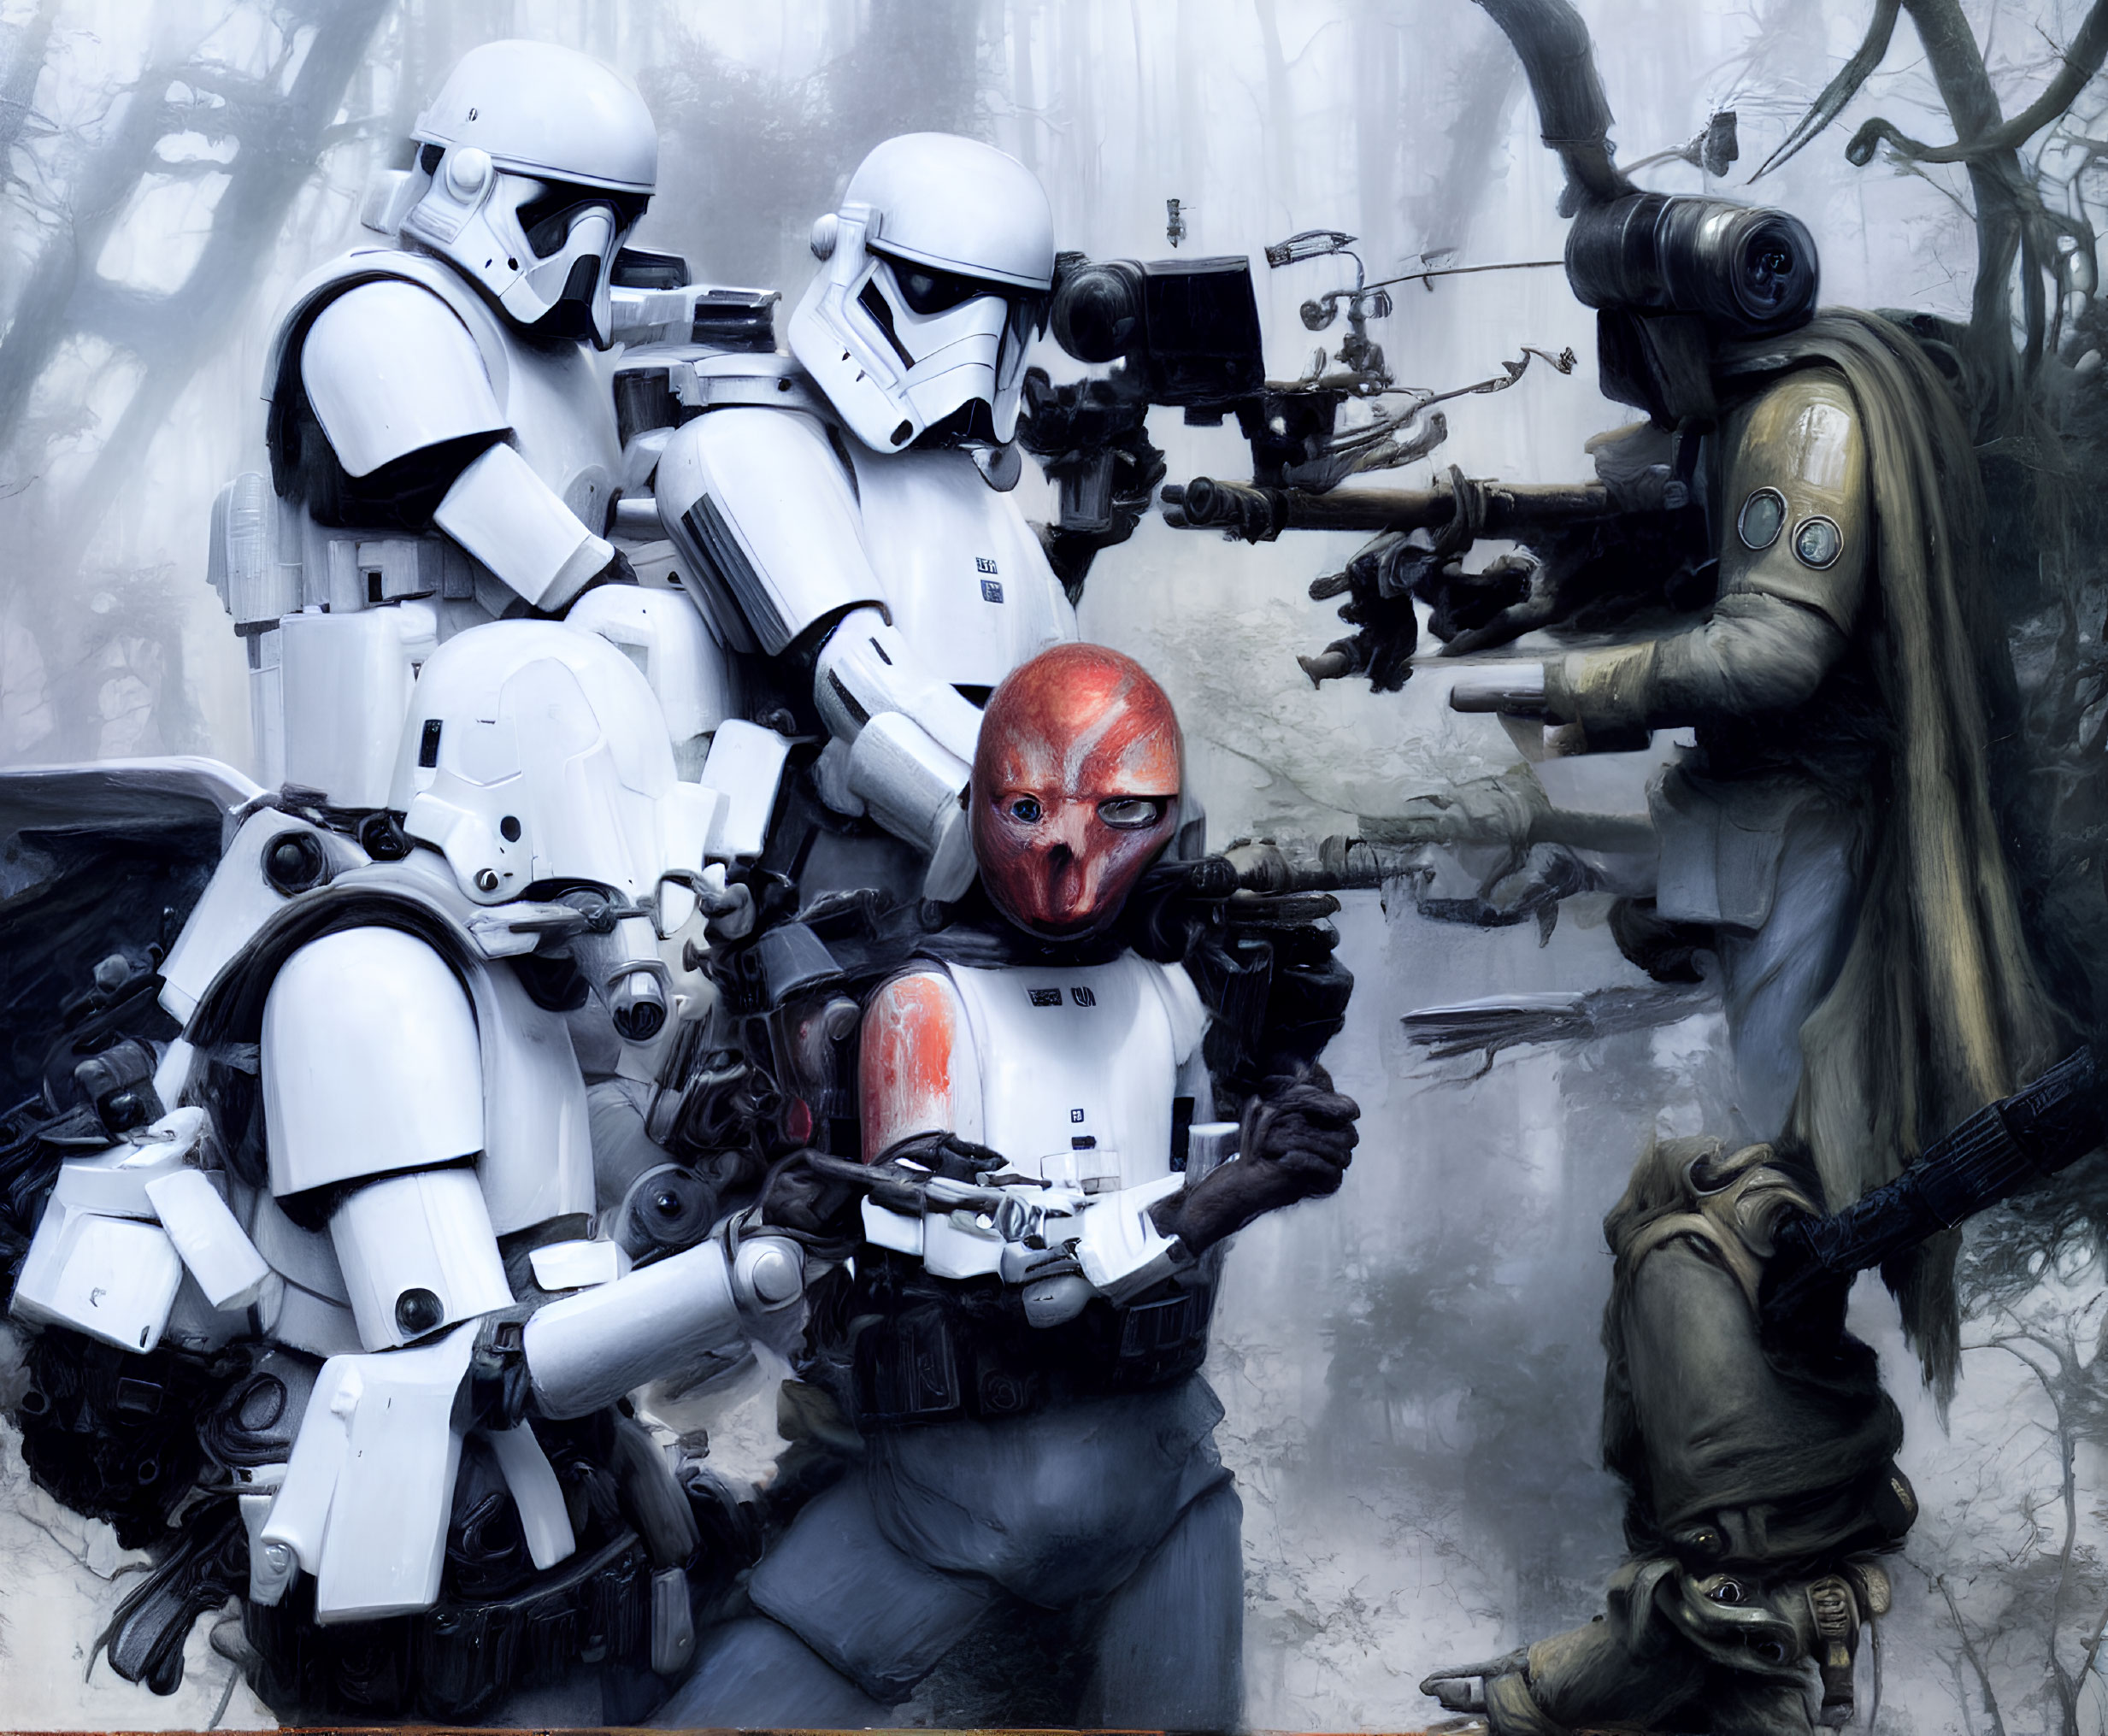 Futuristic stormtroopers capture red-faced alien in misty forest